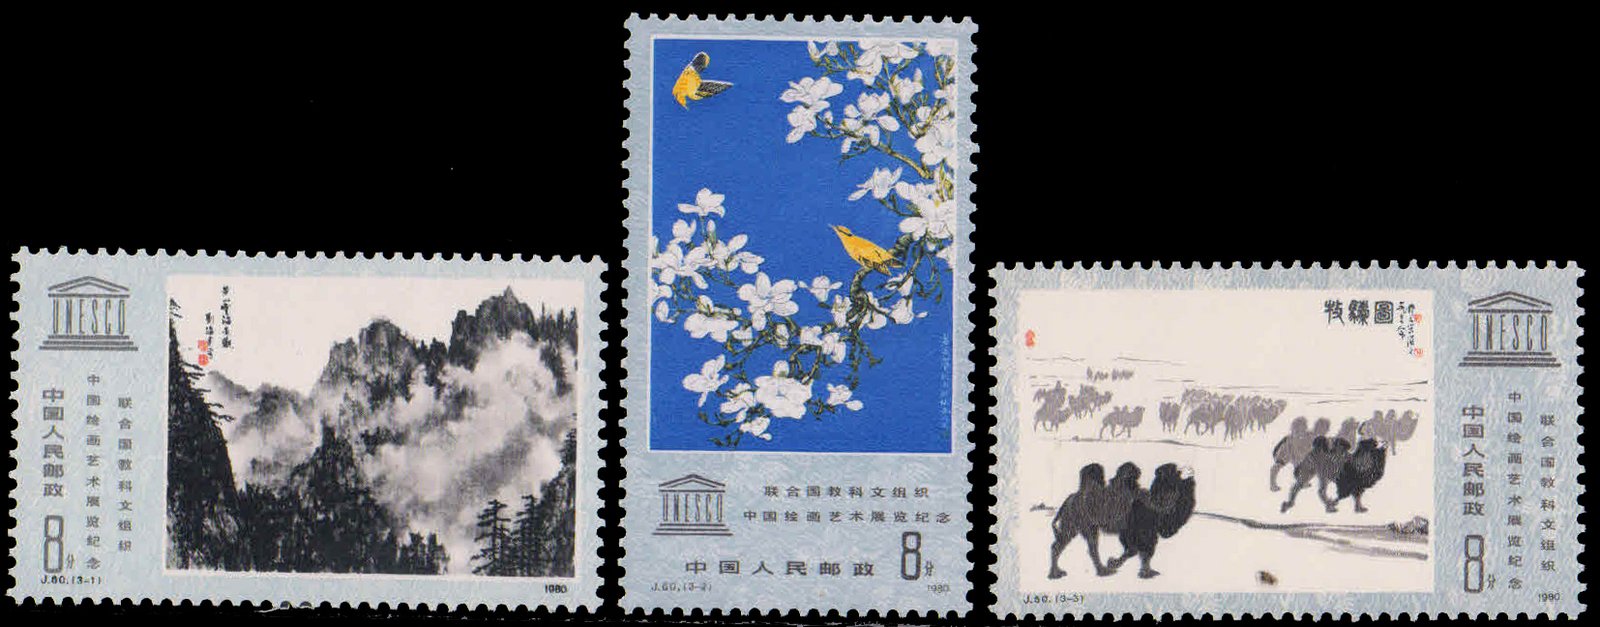 CHINA PR 1980-UNESCO  Exhibition of Chinese Painting & Drawings, Set of 3, MNH, S.G. 3014-16